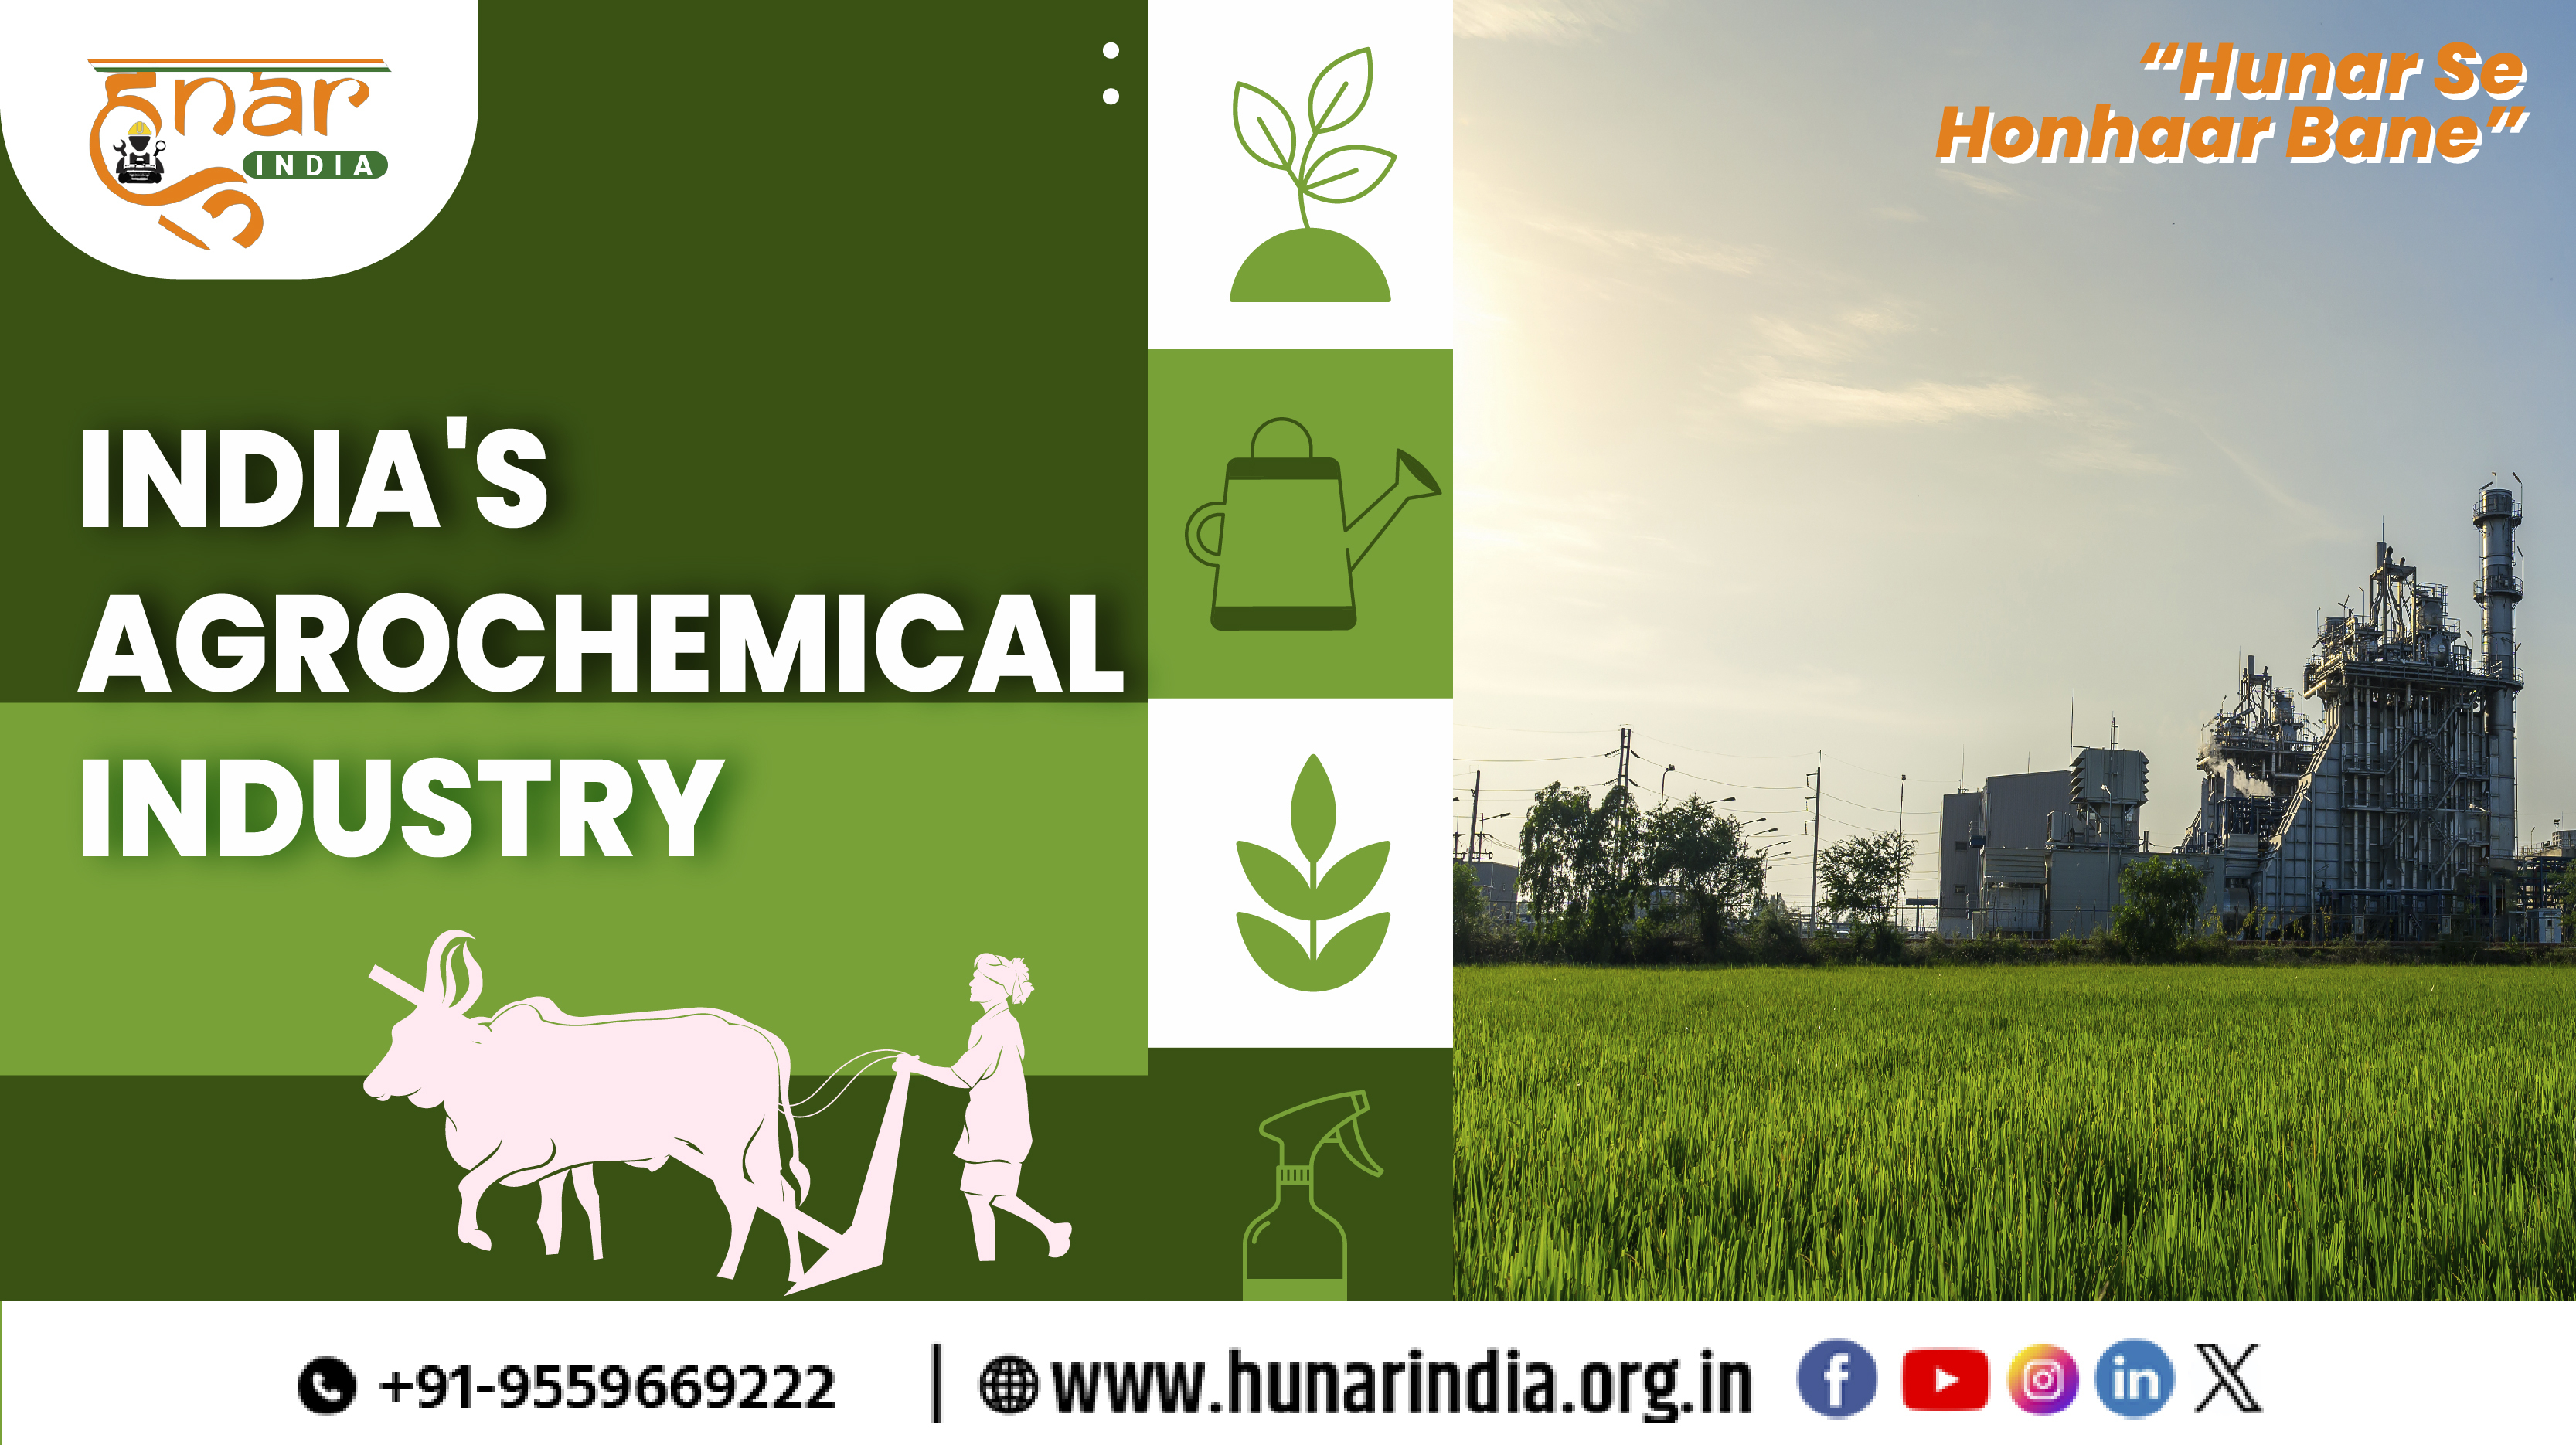 India's agrochemical industry